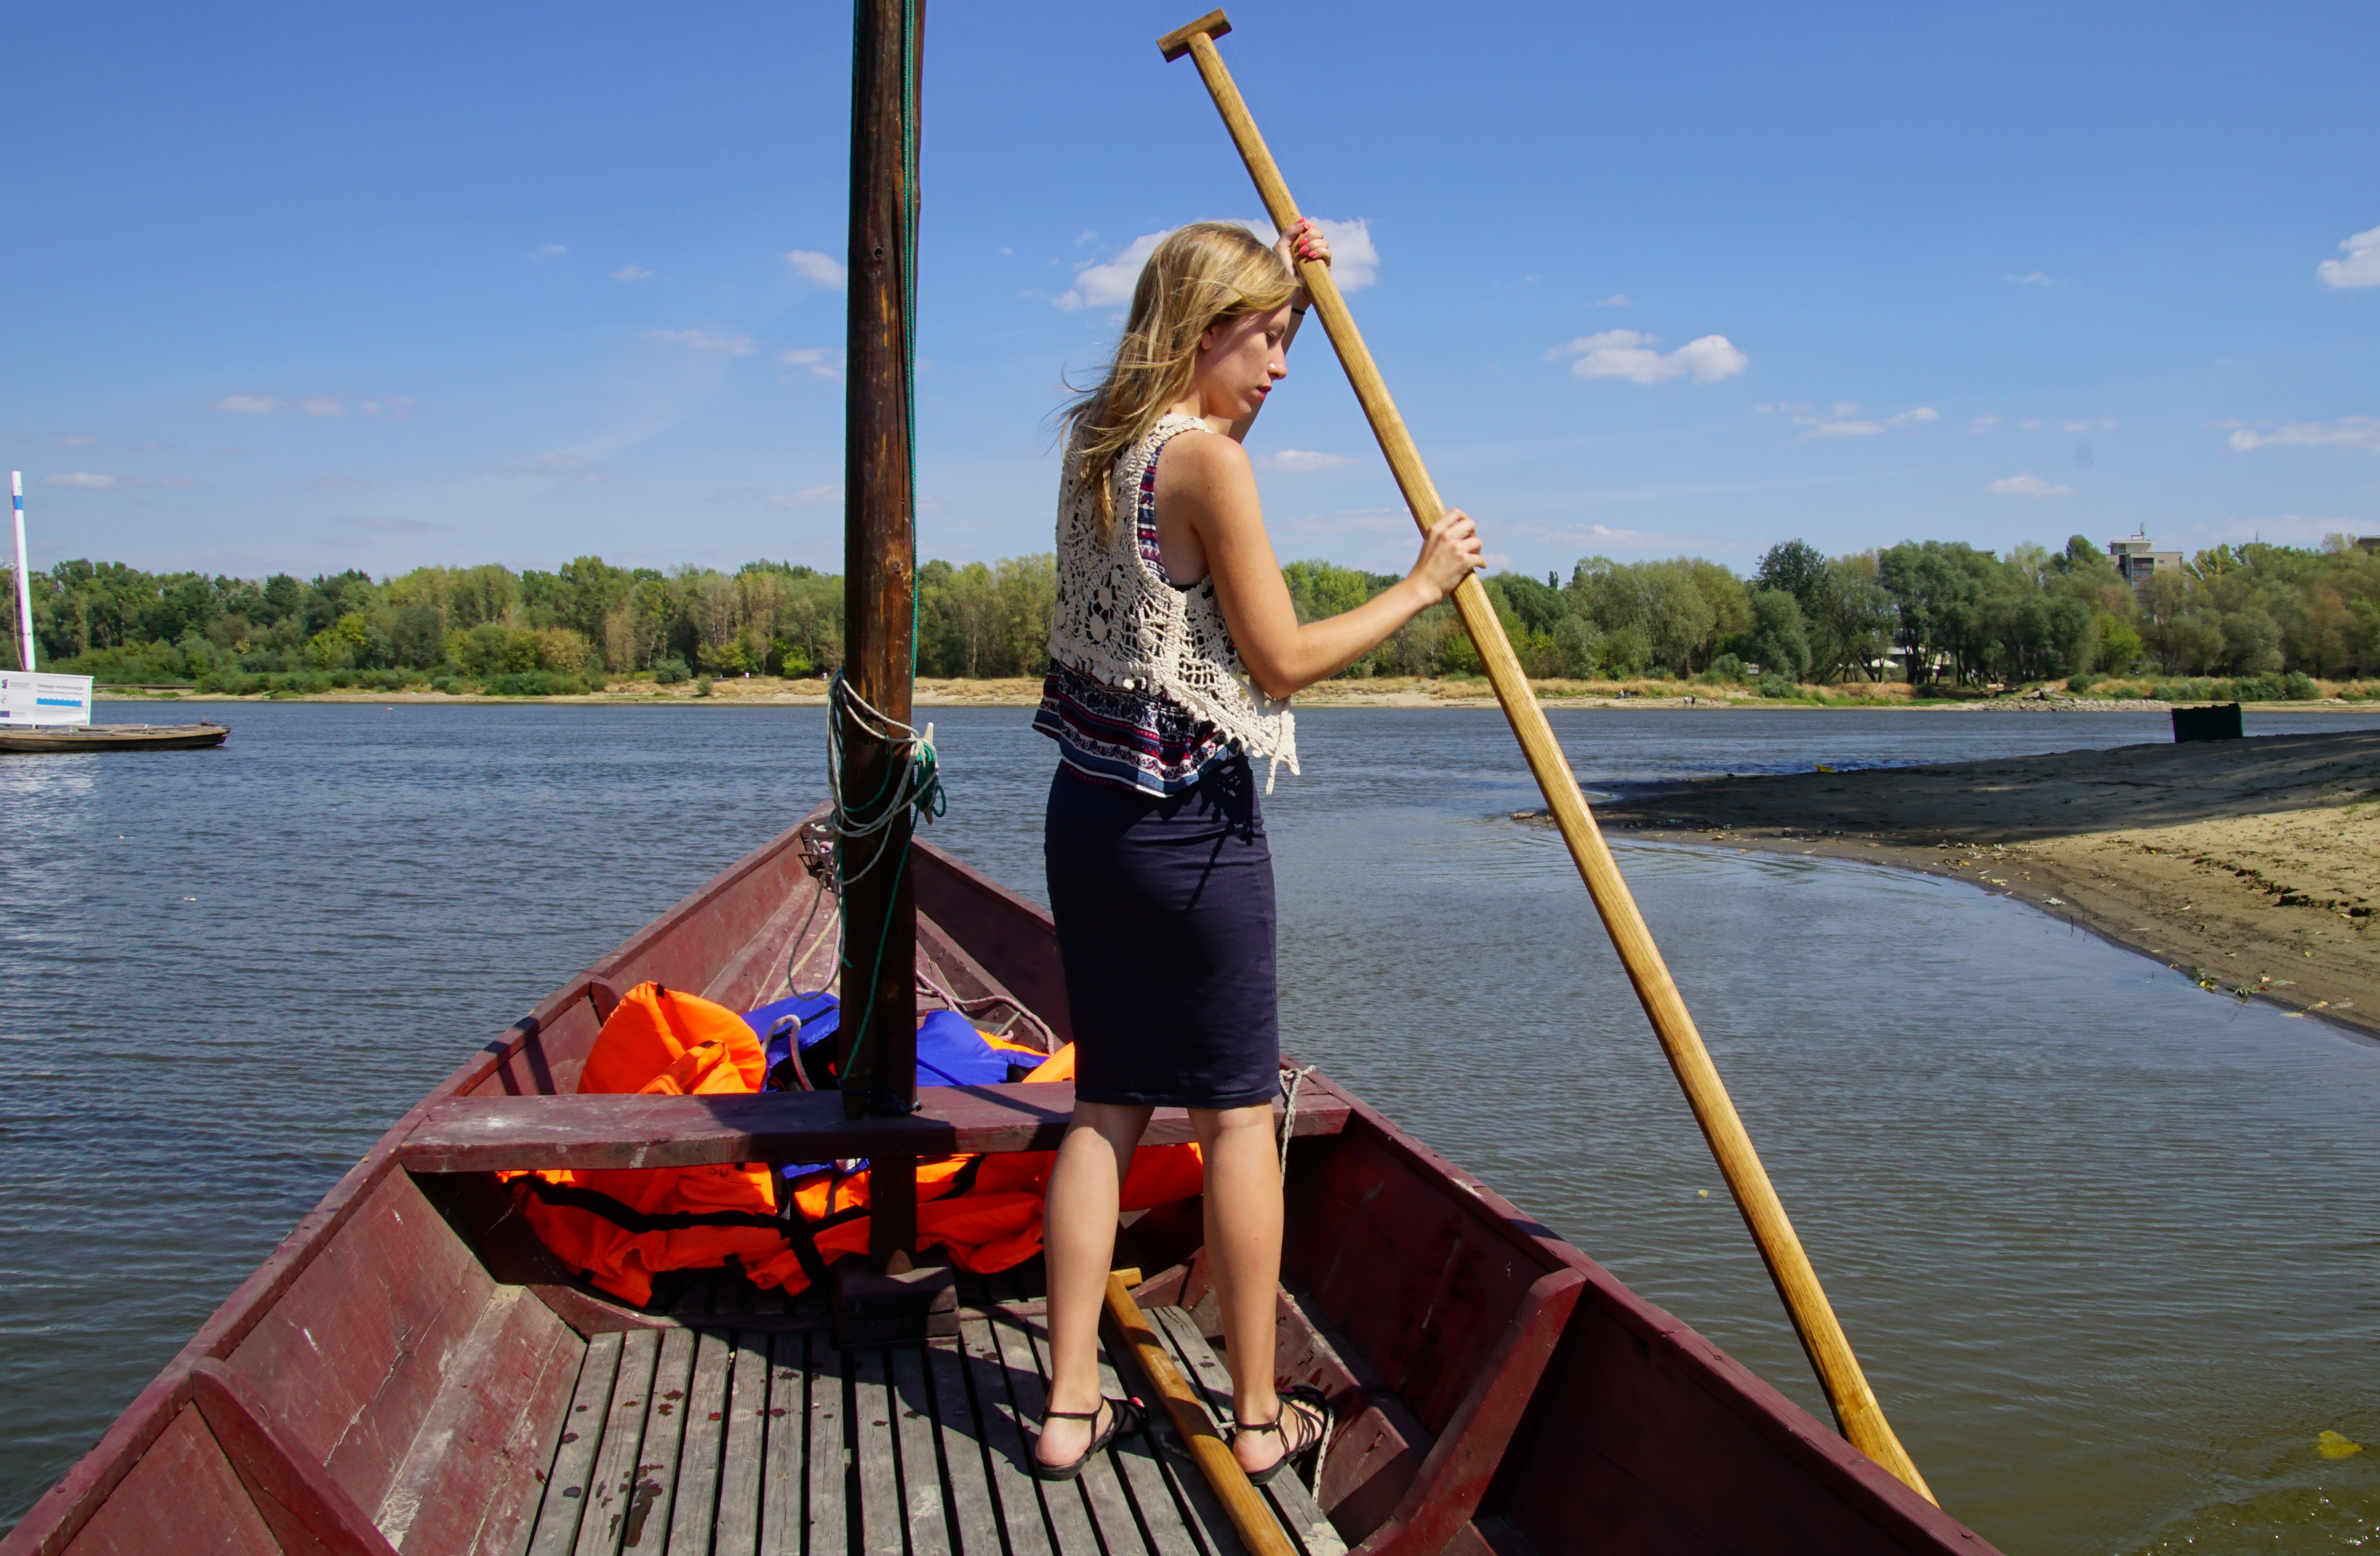 That Backacker Audrey Bergner paddling on a boat in Warsaw, Poland